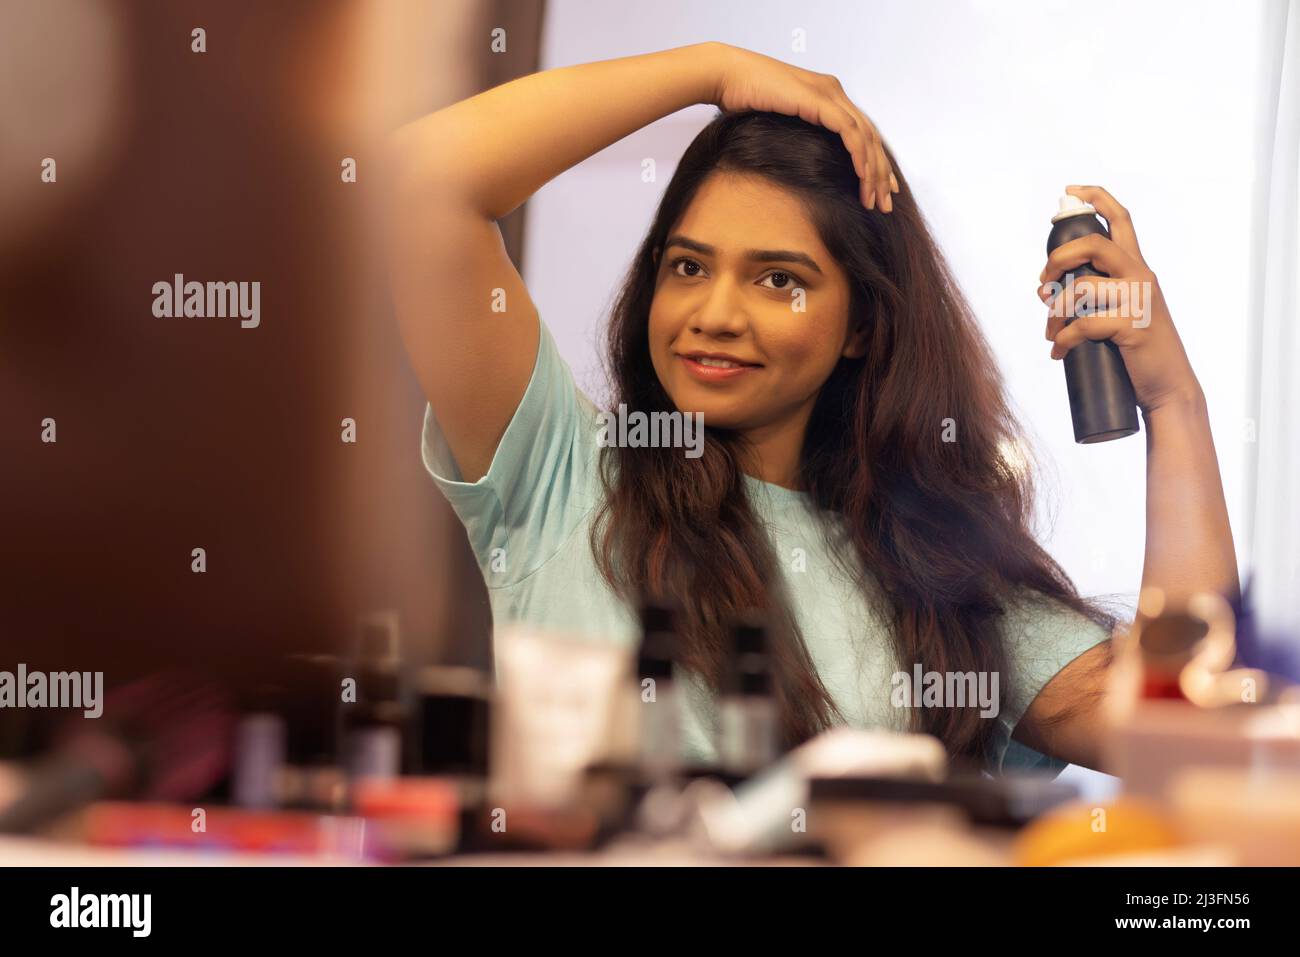 Young woman applying hair spray on her hair in front of mirror Stock Photo